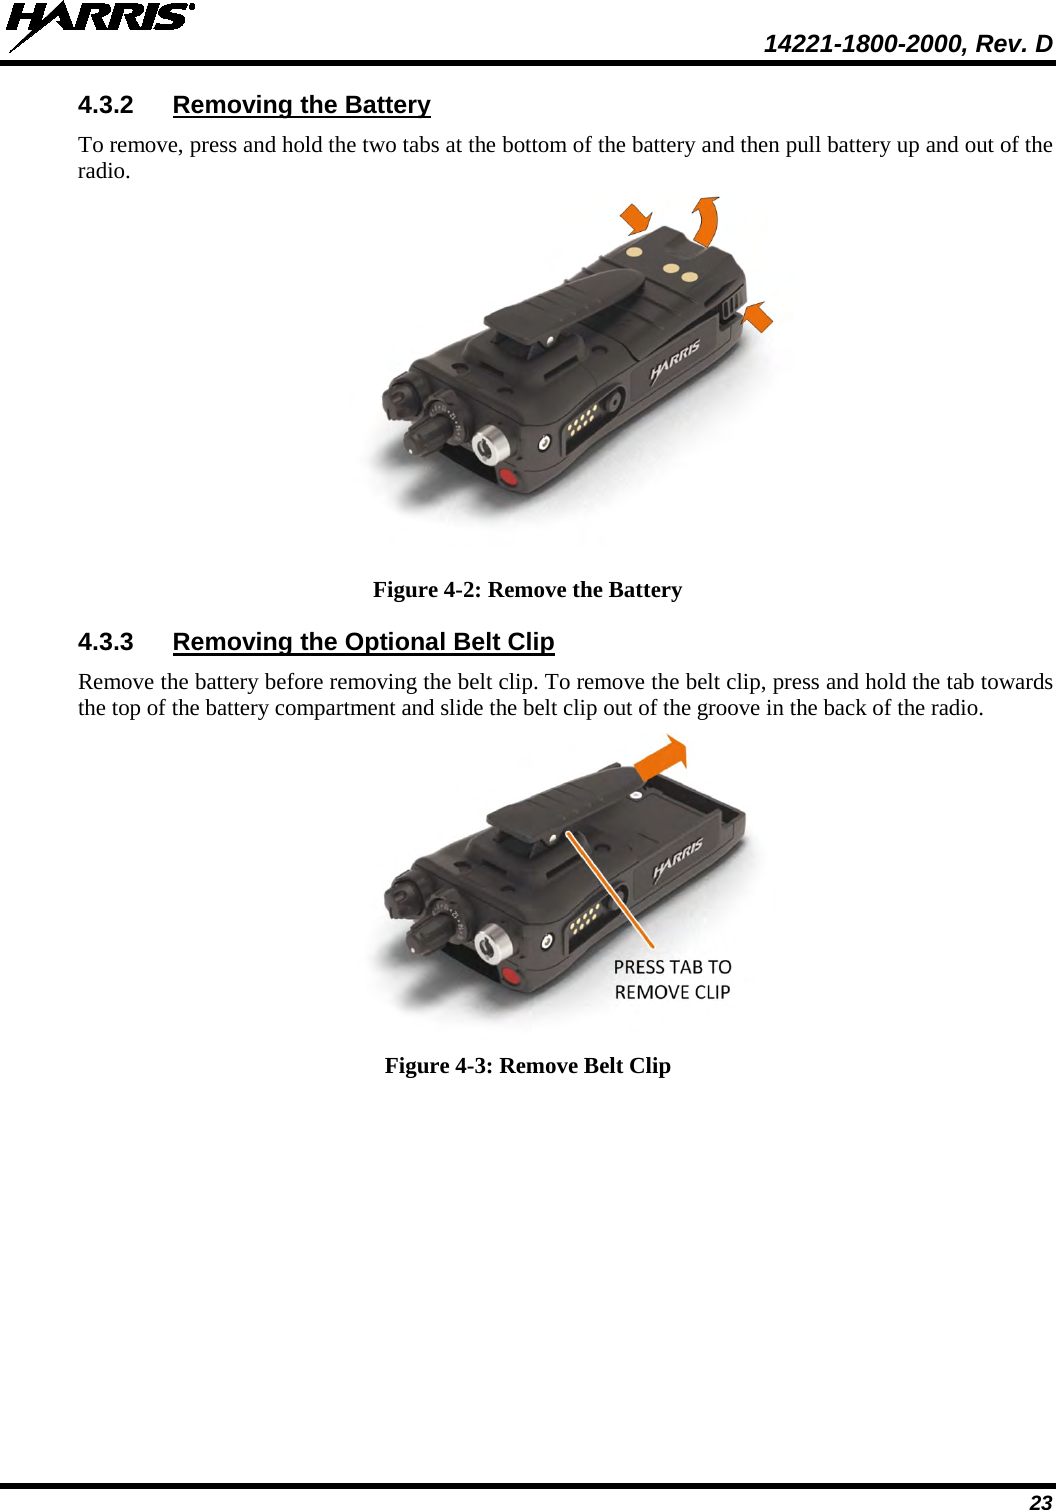  14221-1800-2000, Rev. D 23 4.3.2 Removing the Battery To remove, press and hold the two tabs at the bottom of the battery and then pull battery up and out of the radio.  Figure 4-2: Remove the Battery 4.3.3 Removing the Optional Belt Clip Remove the battery before removing the belt clip. To remove the belt clip, press and hold the tab towards the top of the battery compartment and slide the belt clip out of the groove in the back of the radio.  Figure 4-3: Remove Belt Clip 